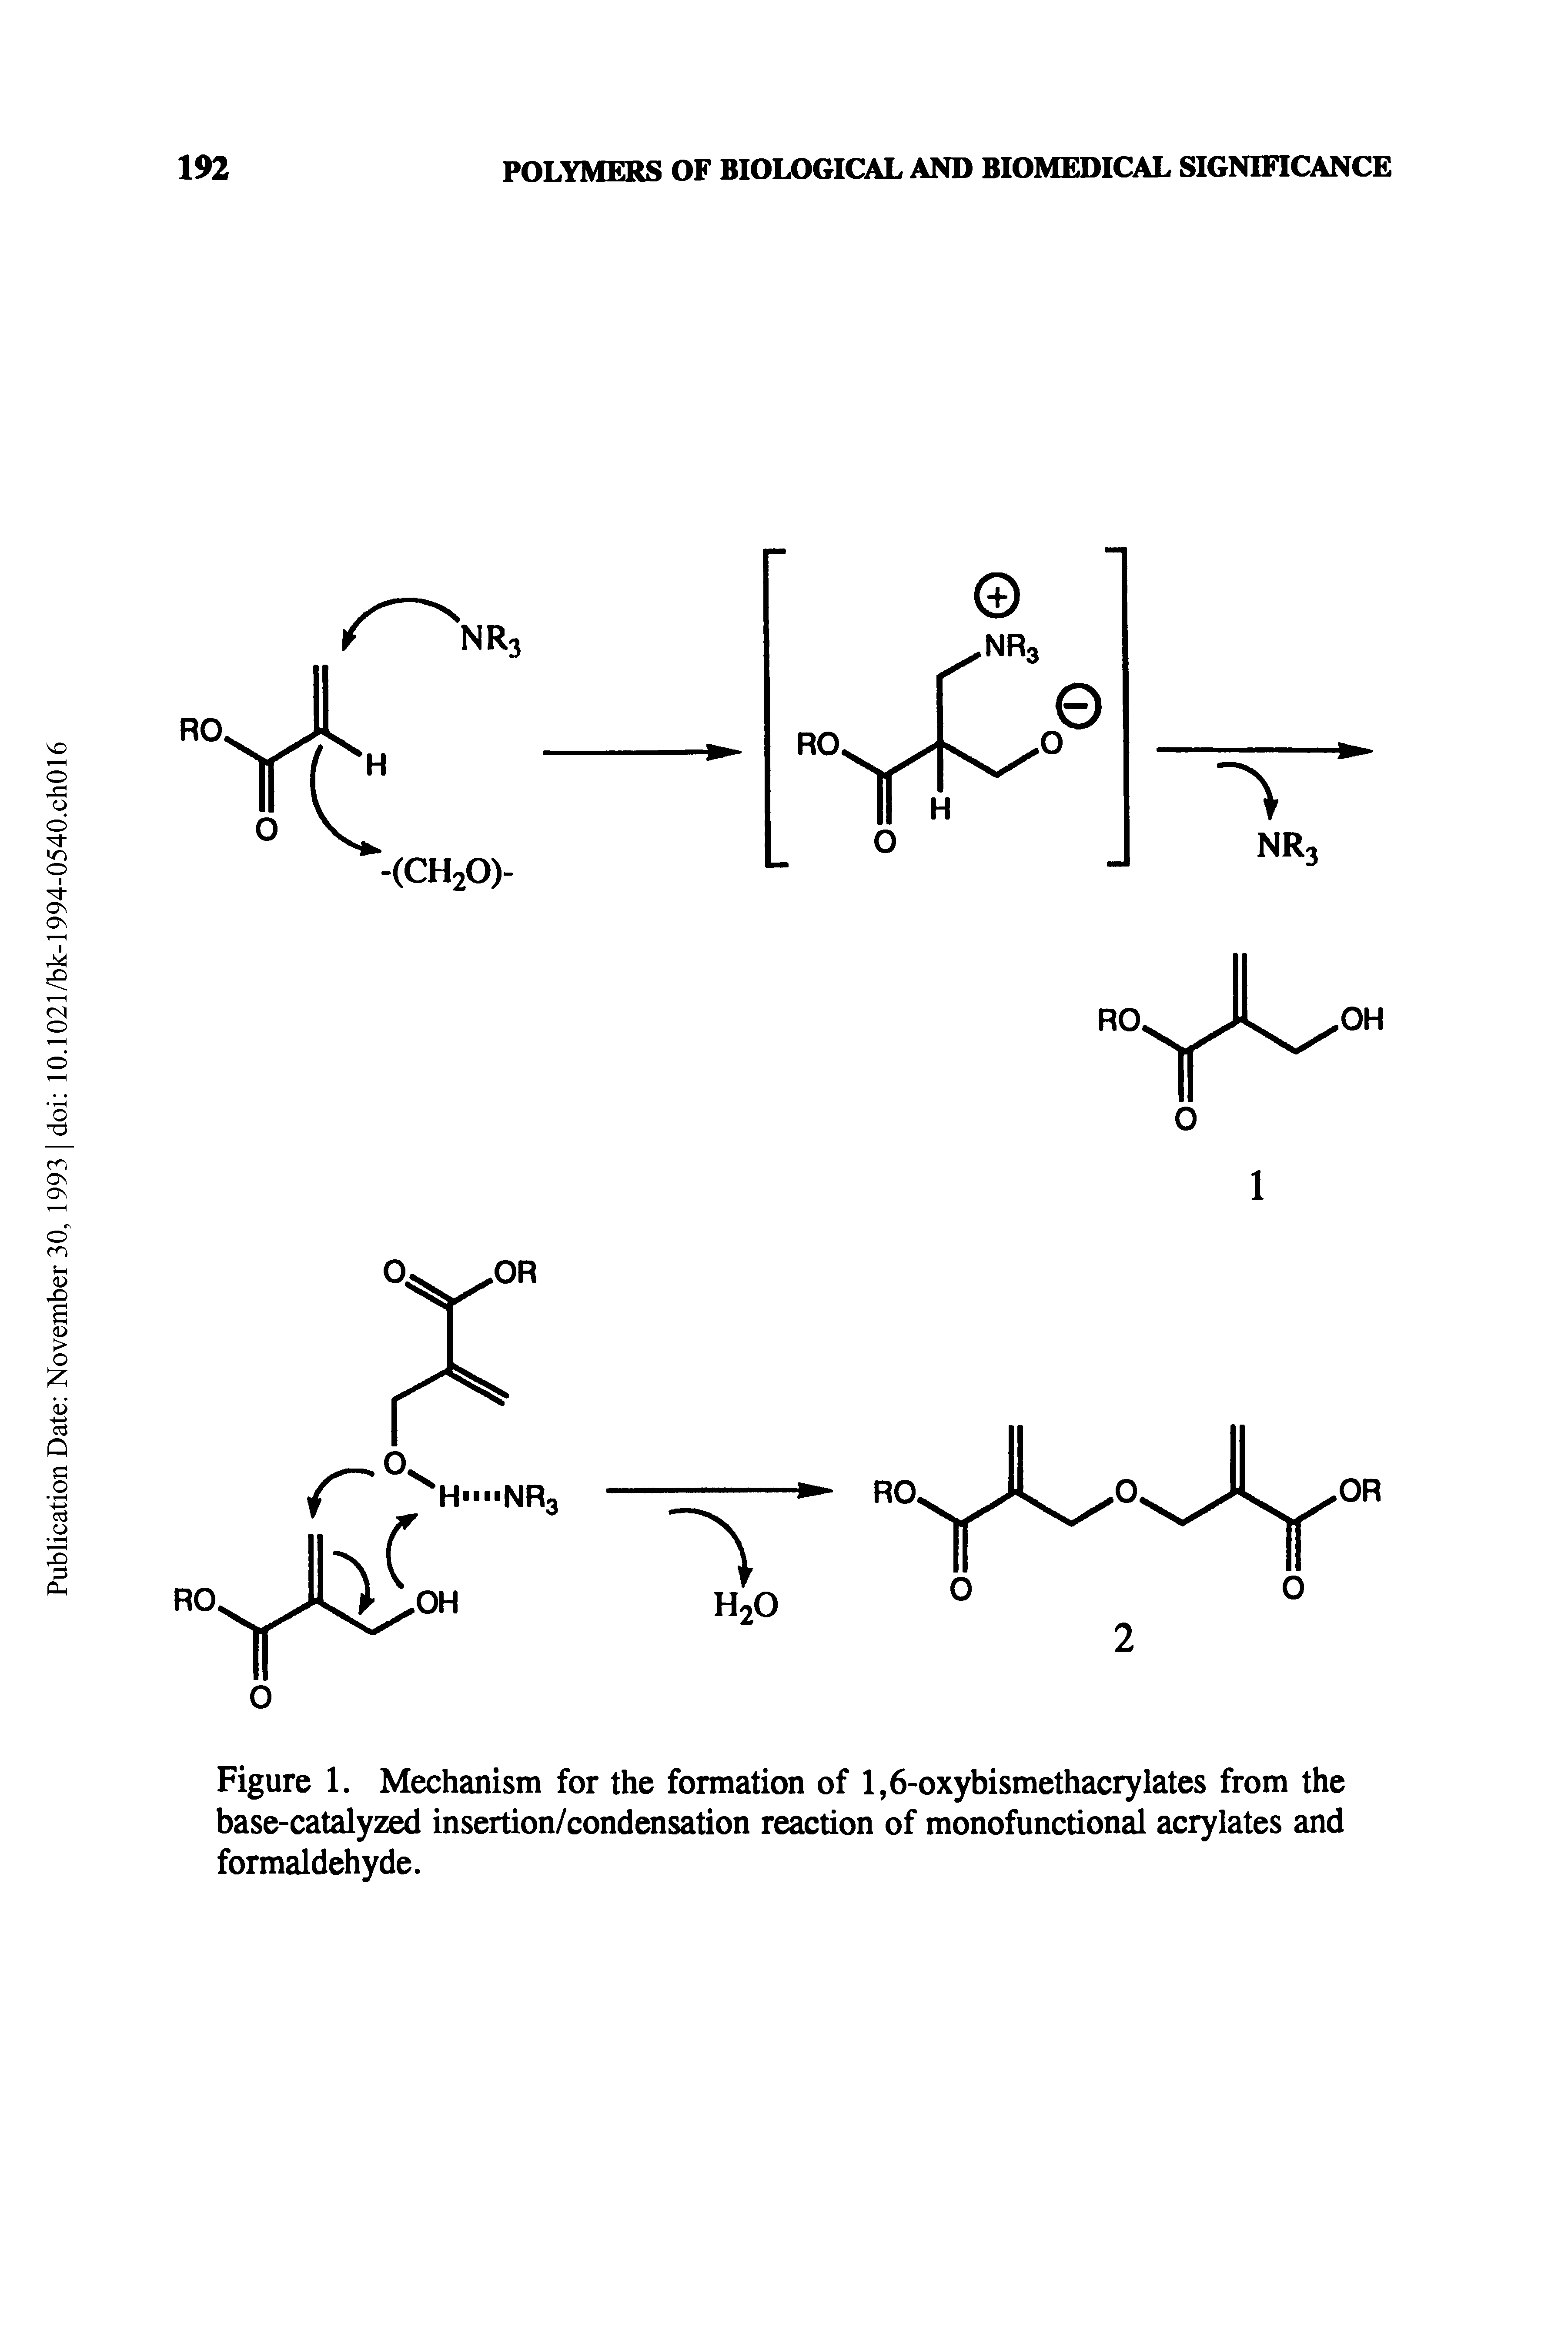 Figure 1. Mechanism for the formation of 1,6-oxybismethacrylates from the base-catalyzed insertion/condensation reaction of monofunctional acrylates and formaldehyde.